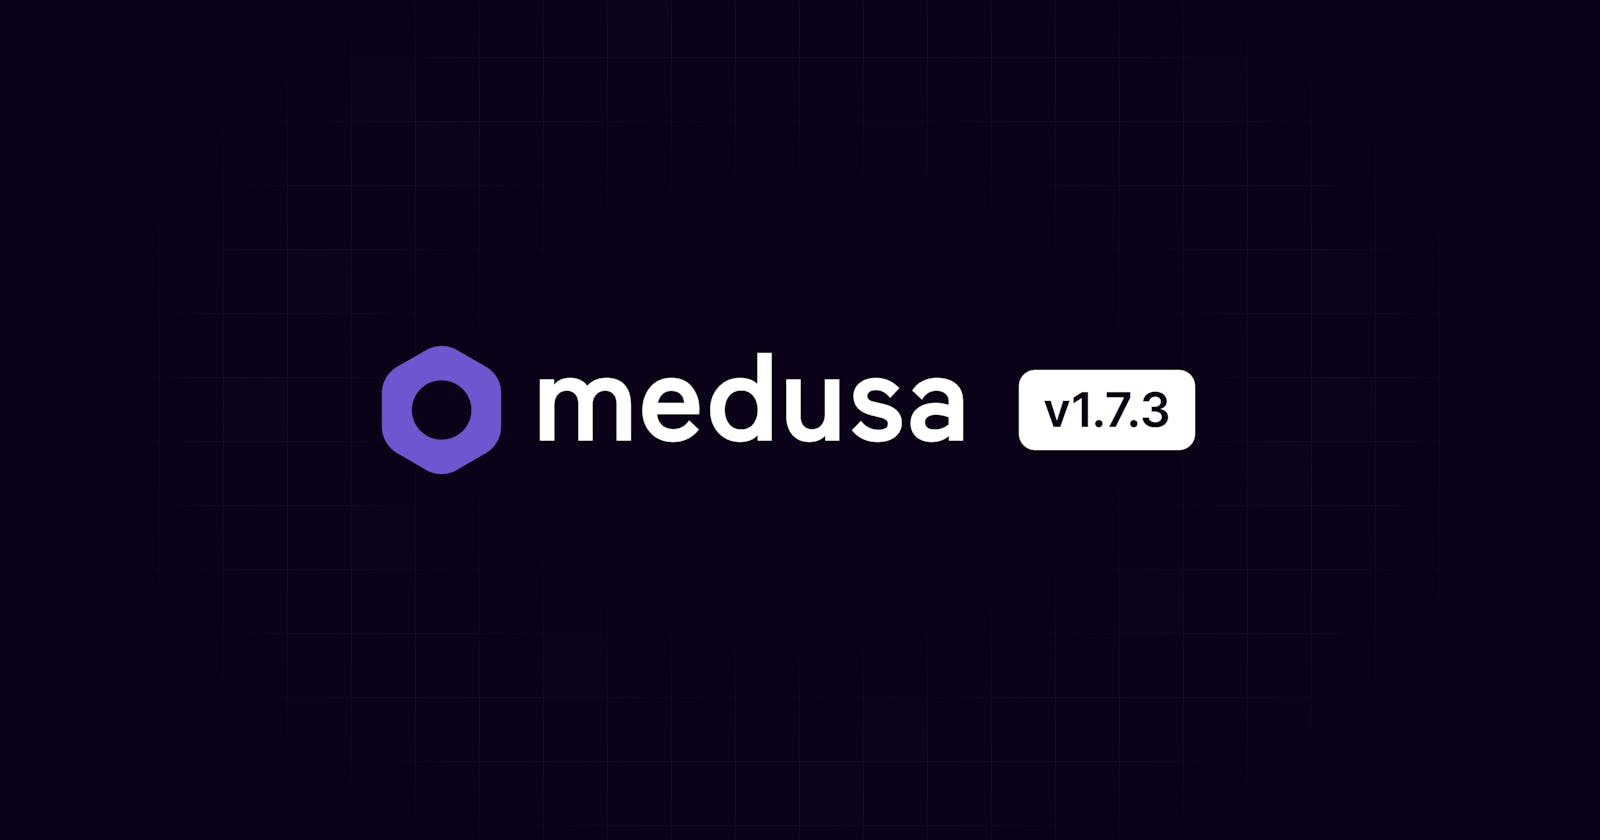 Medusa v1.7.3: Sales Channels out of Beta, Improvements to events, and more!